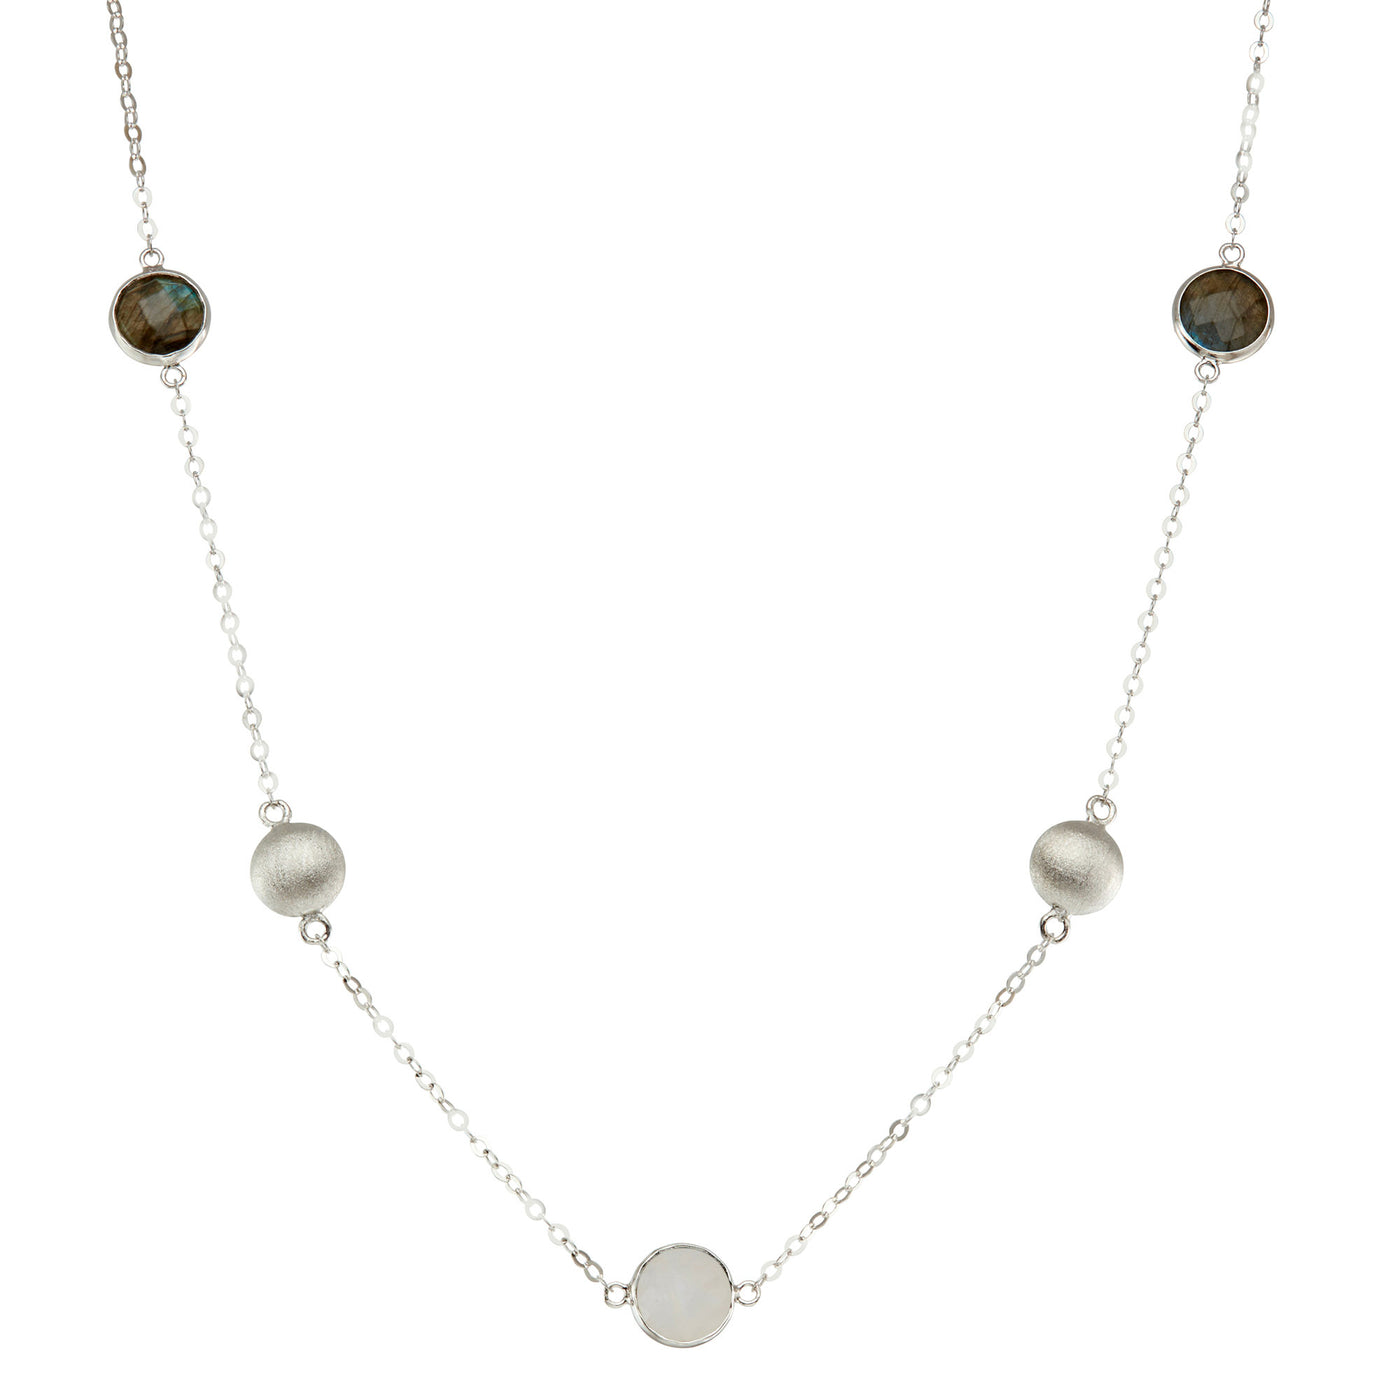 Rebecca Sloane Silver Necklace with Stations and Round Gemstones